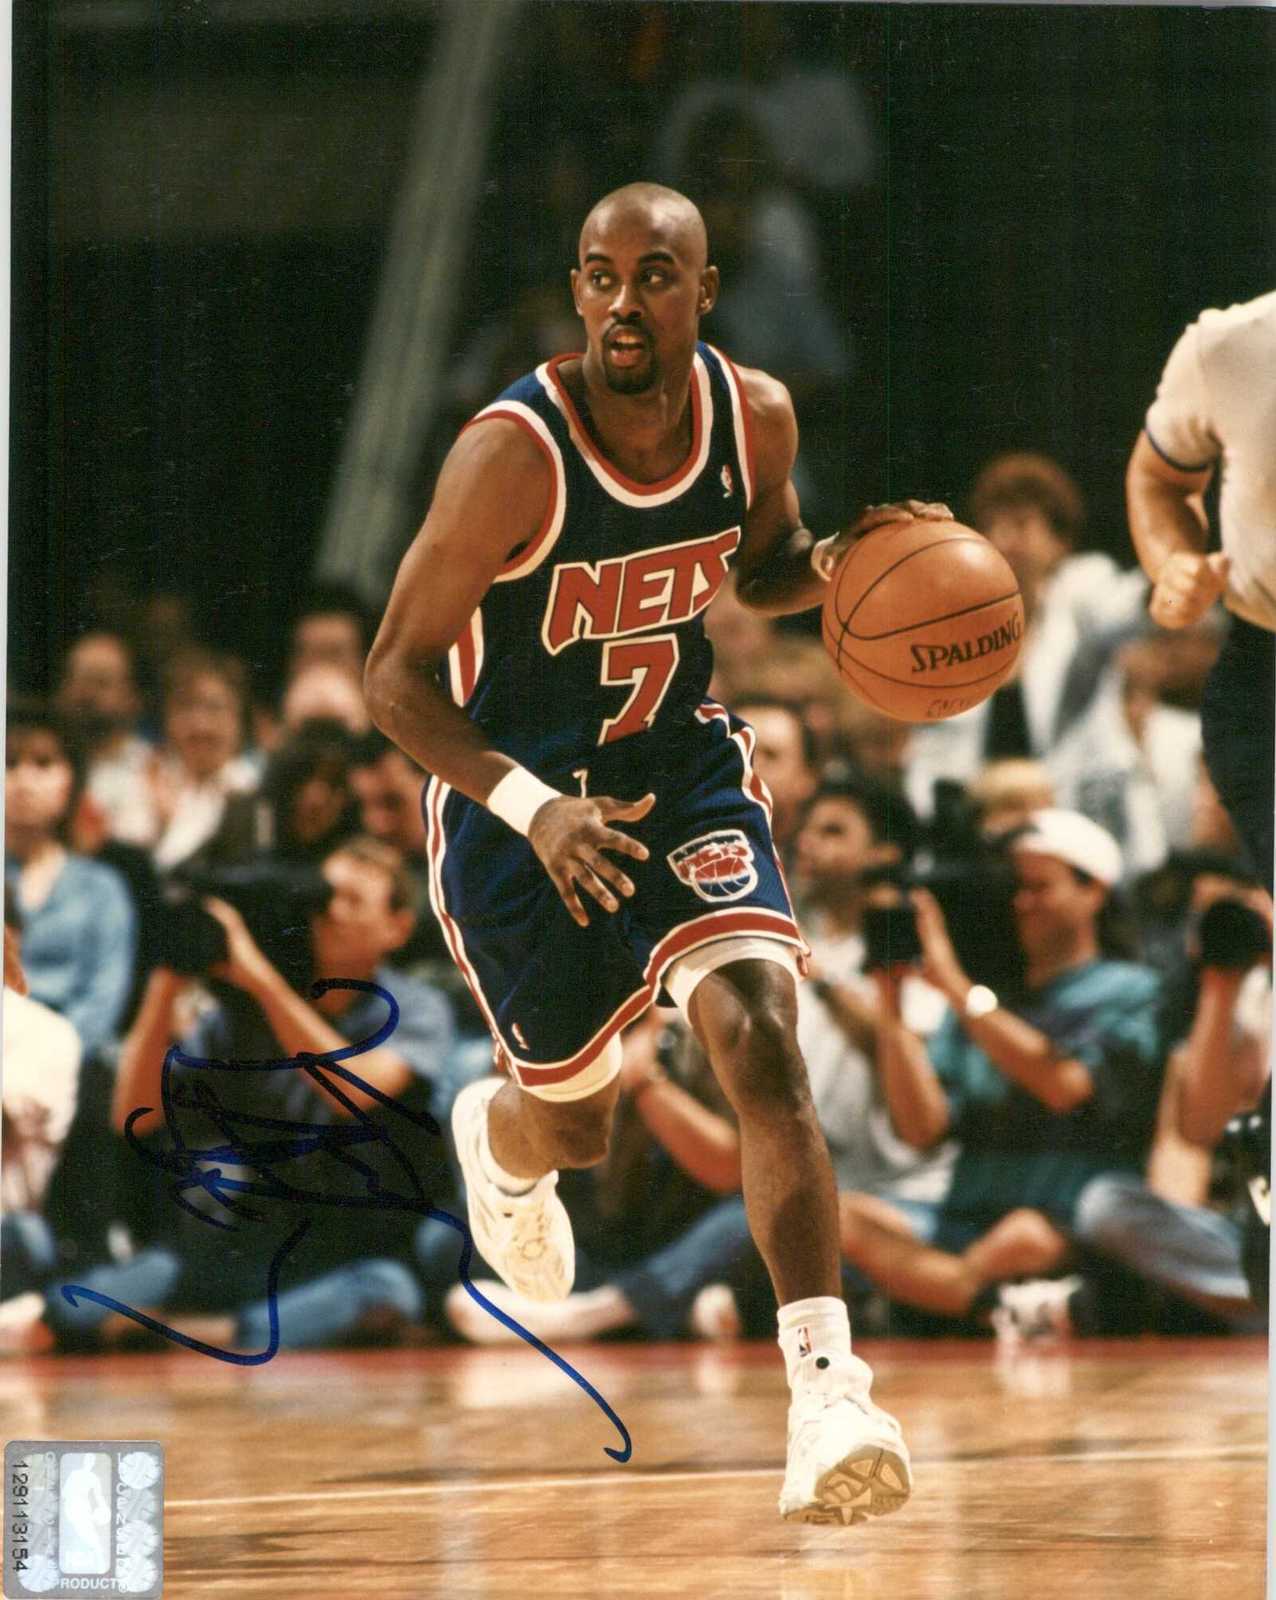 Primary image for Kenny Anderson Signed Autographed Glossy 8x10 Photo - New Jersey Nets